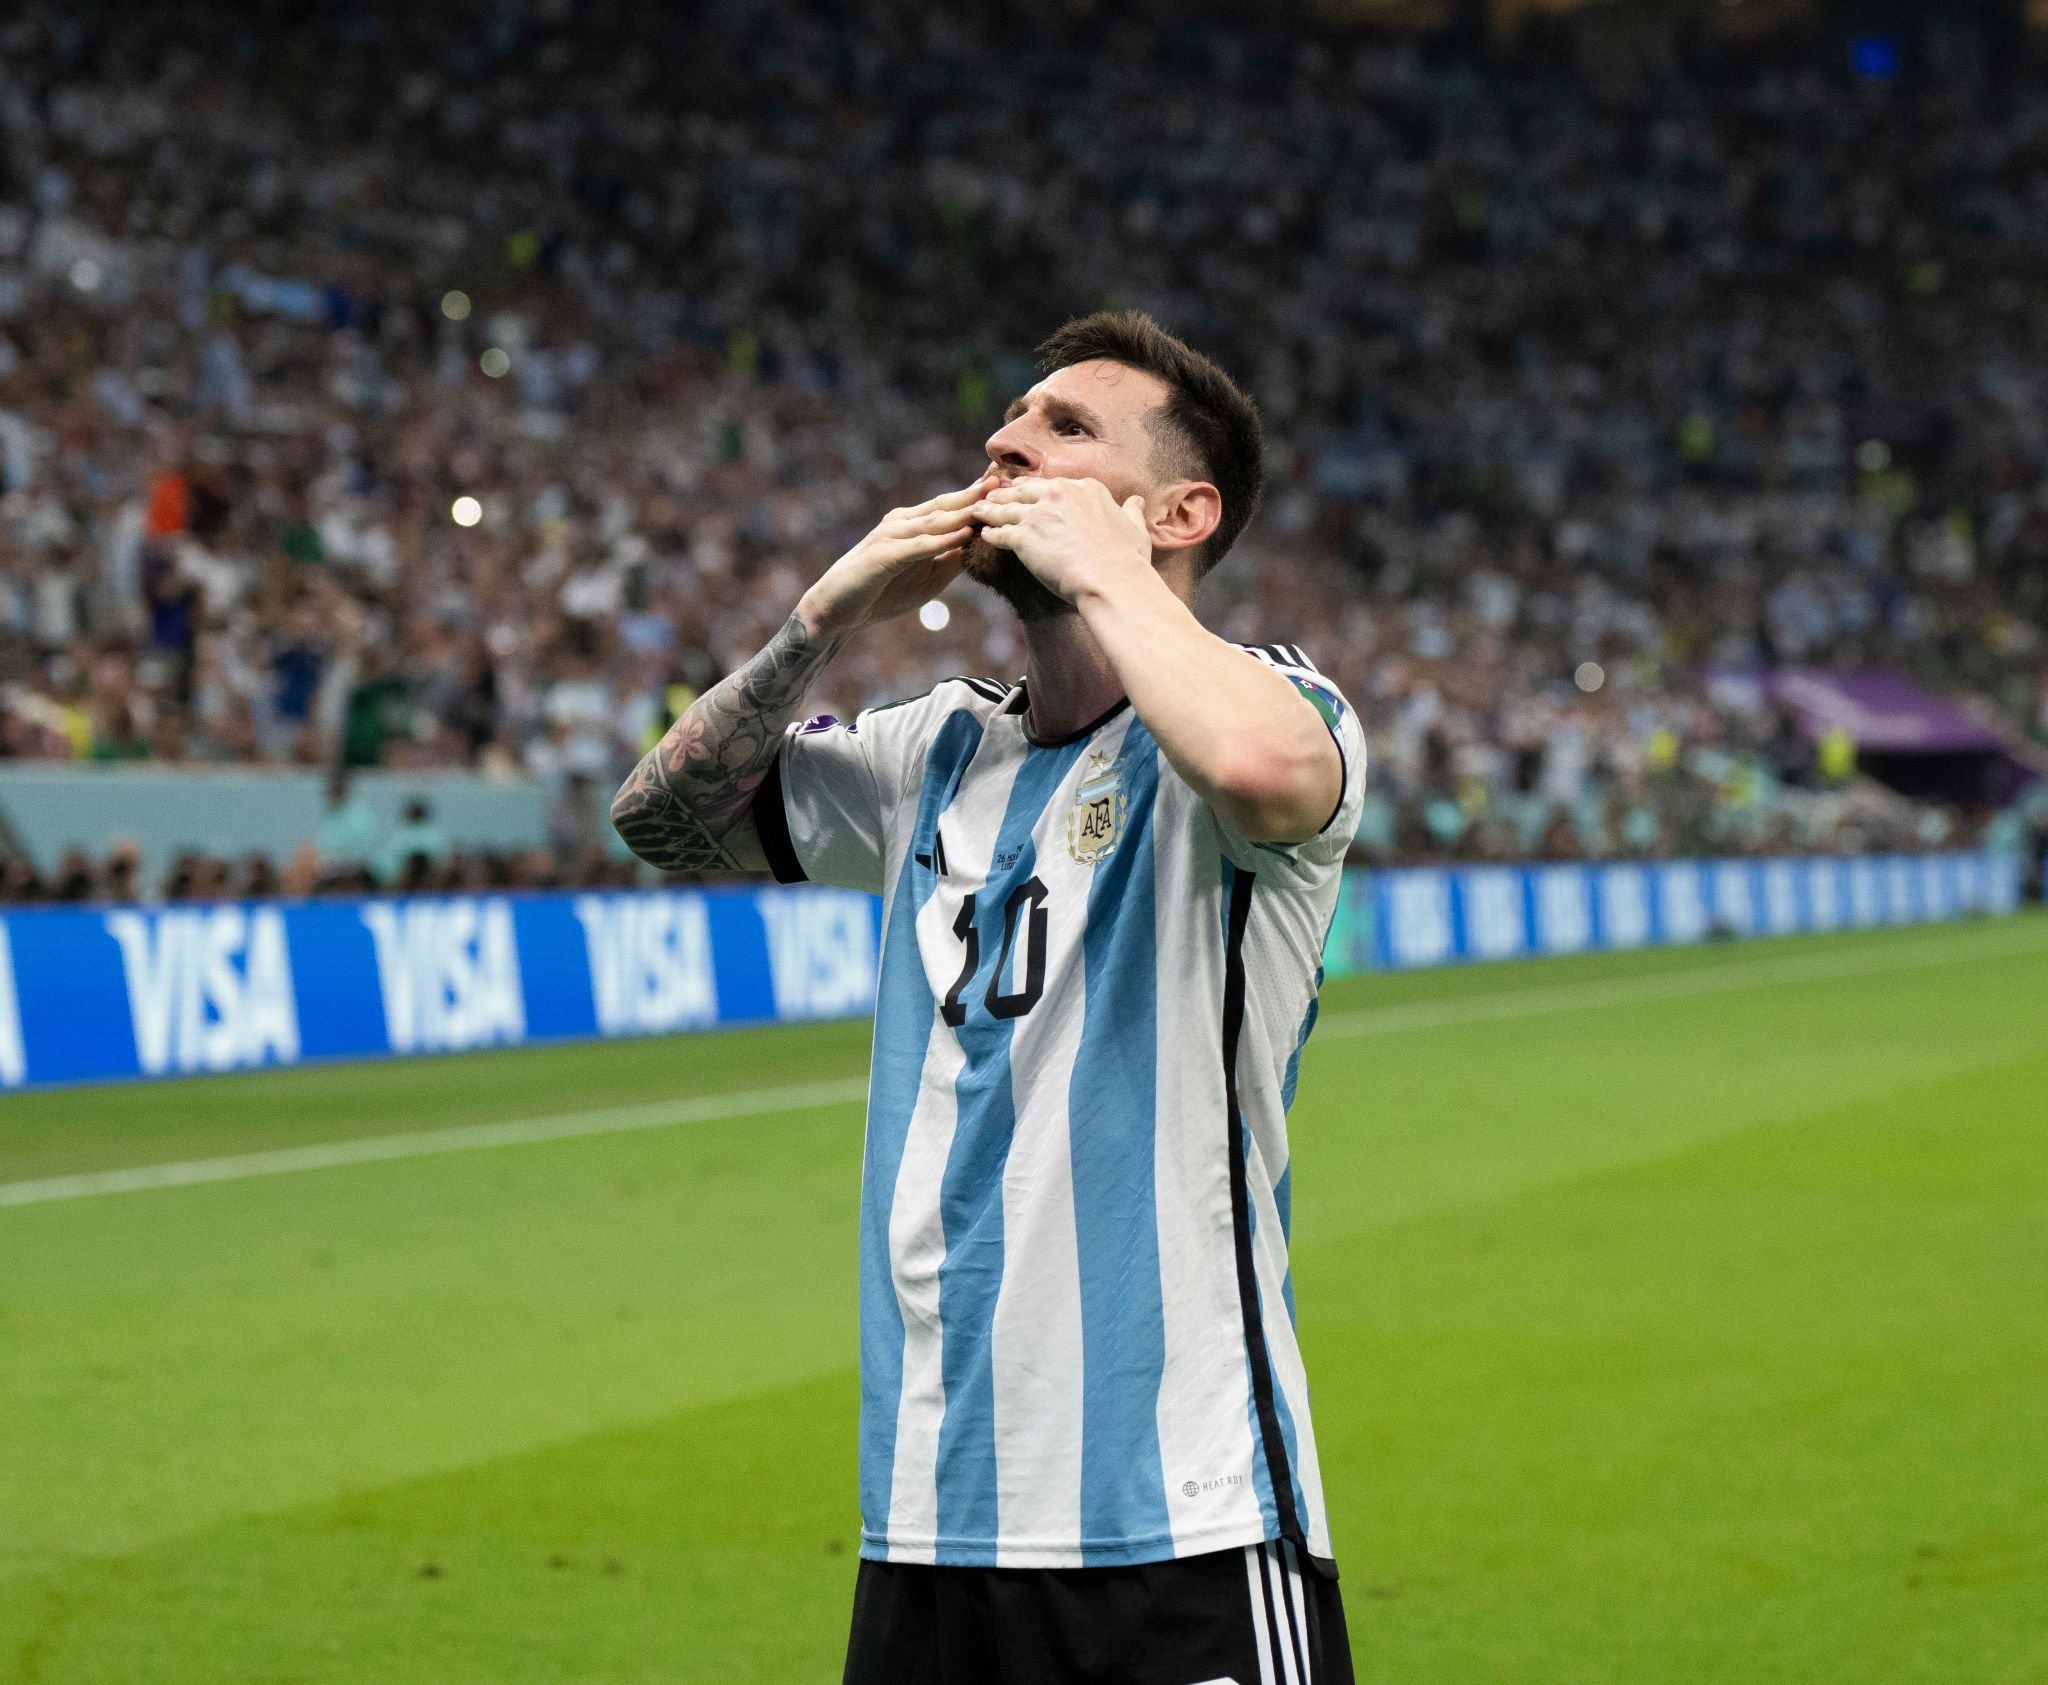 Lionel Messi scores penalty, gives Argentina lead vs France in FIFA World Cup 2022 final: Watch